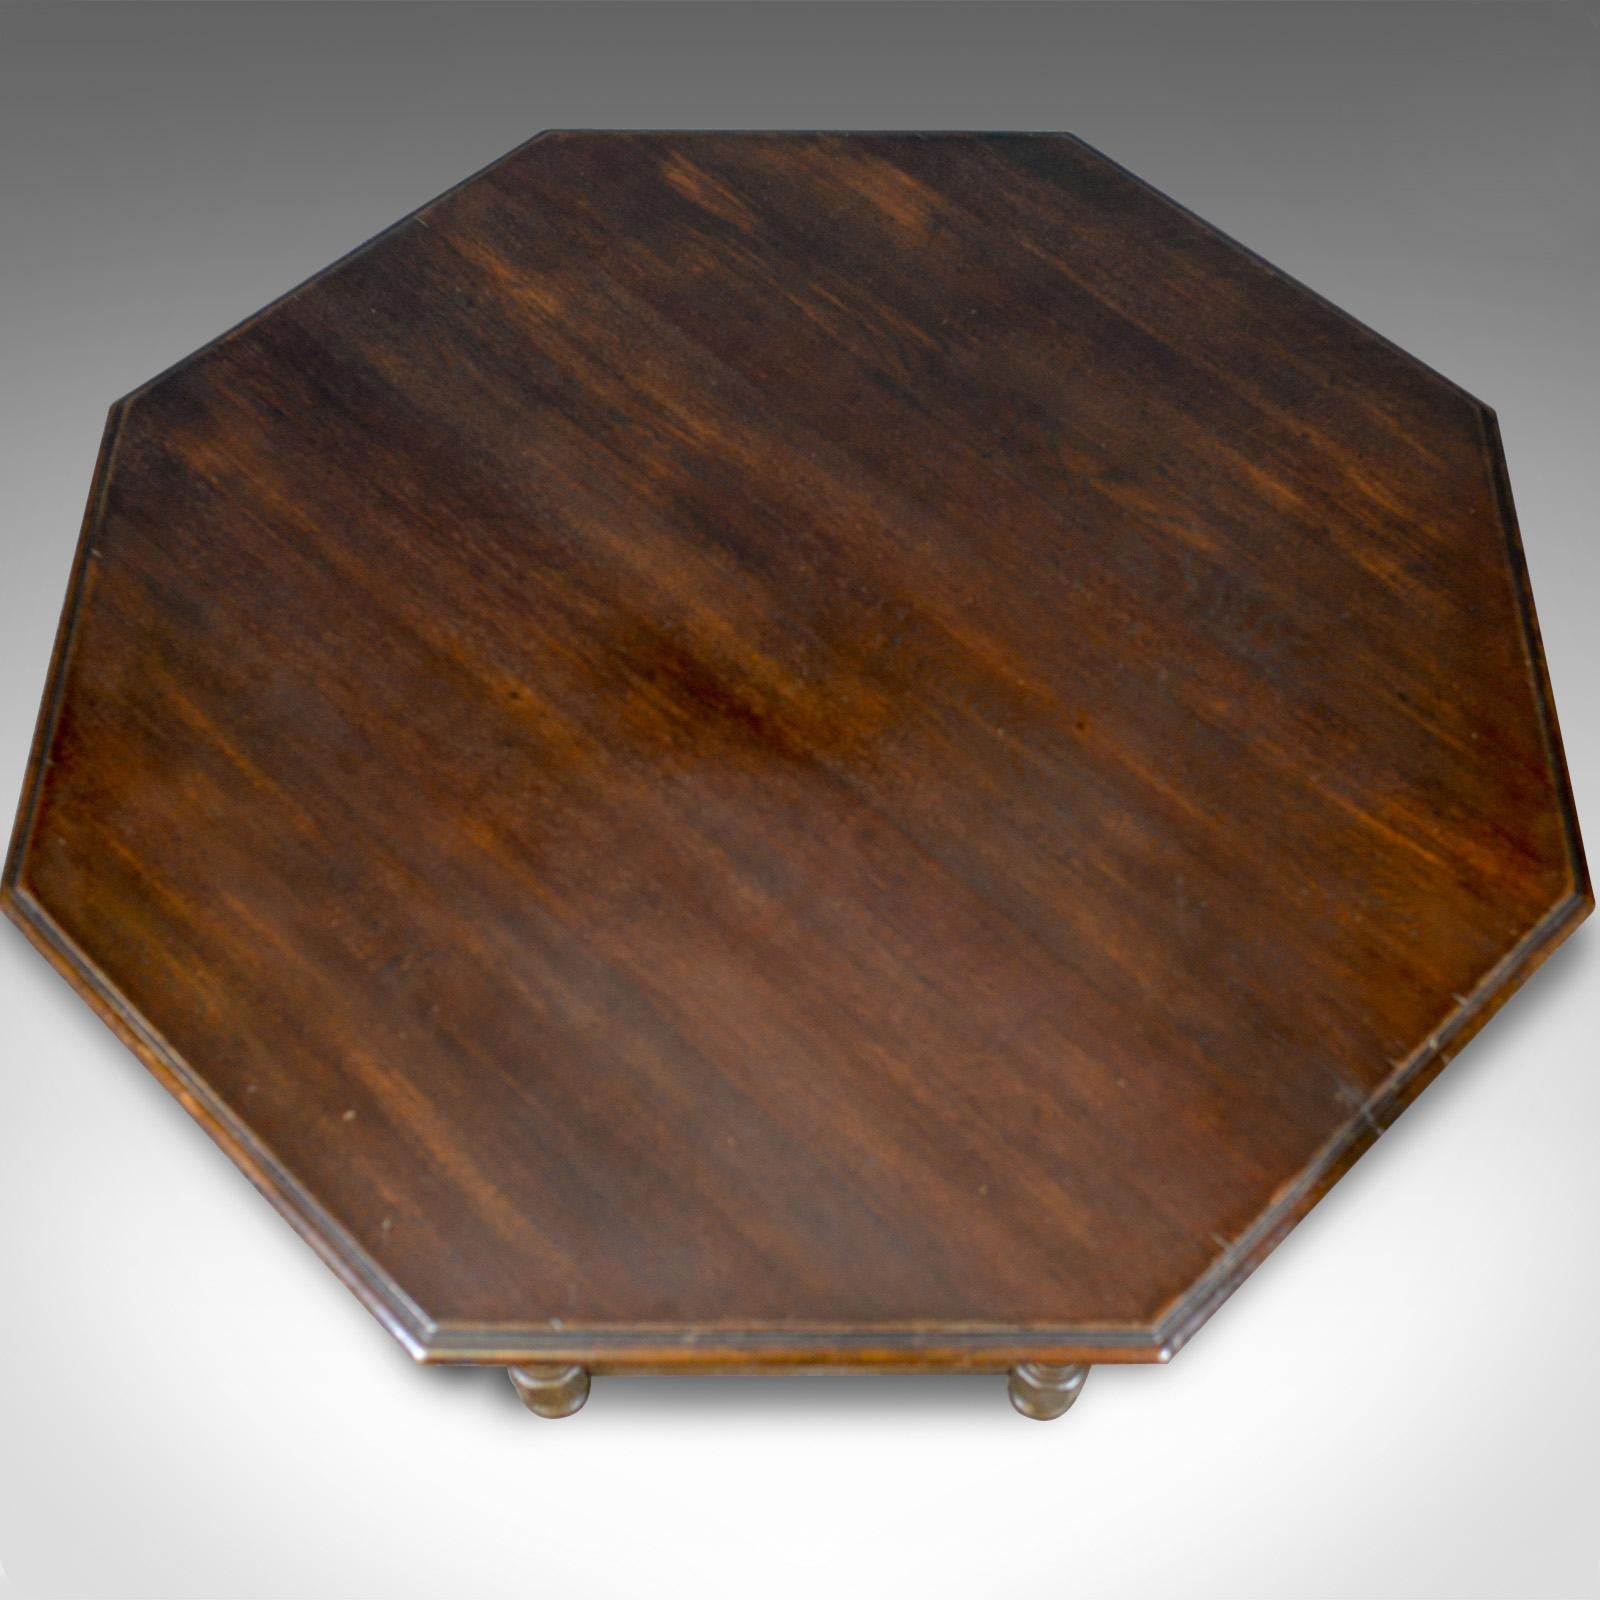 This is a large vintage coffee table. An English oak, octagonal low table dating to the late 20th century.

Large, solid oak coffee table
Octagonal top with edge molding 
Rich, dark wax polished finish.

Deep apron features a pair of hidden